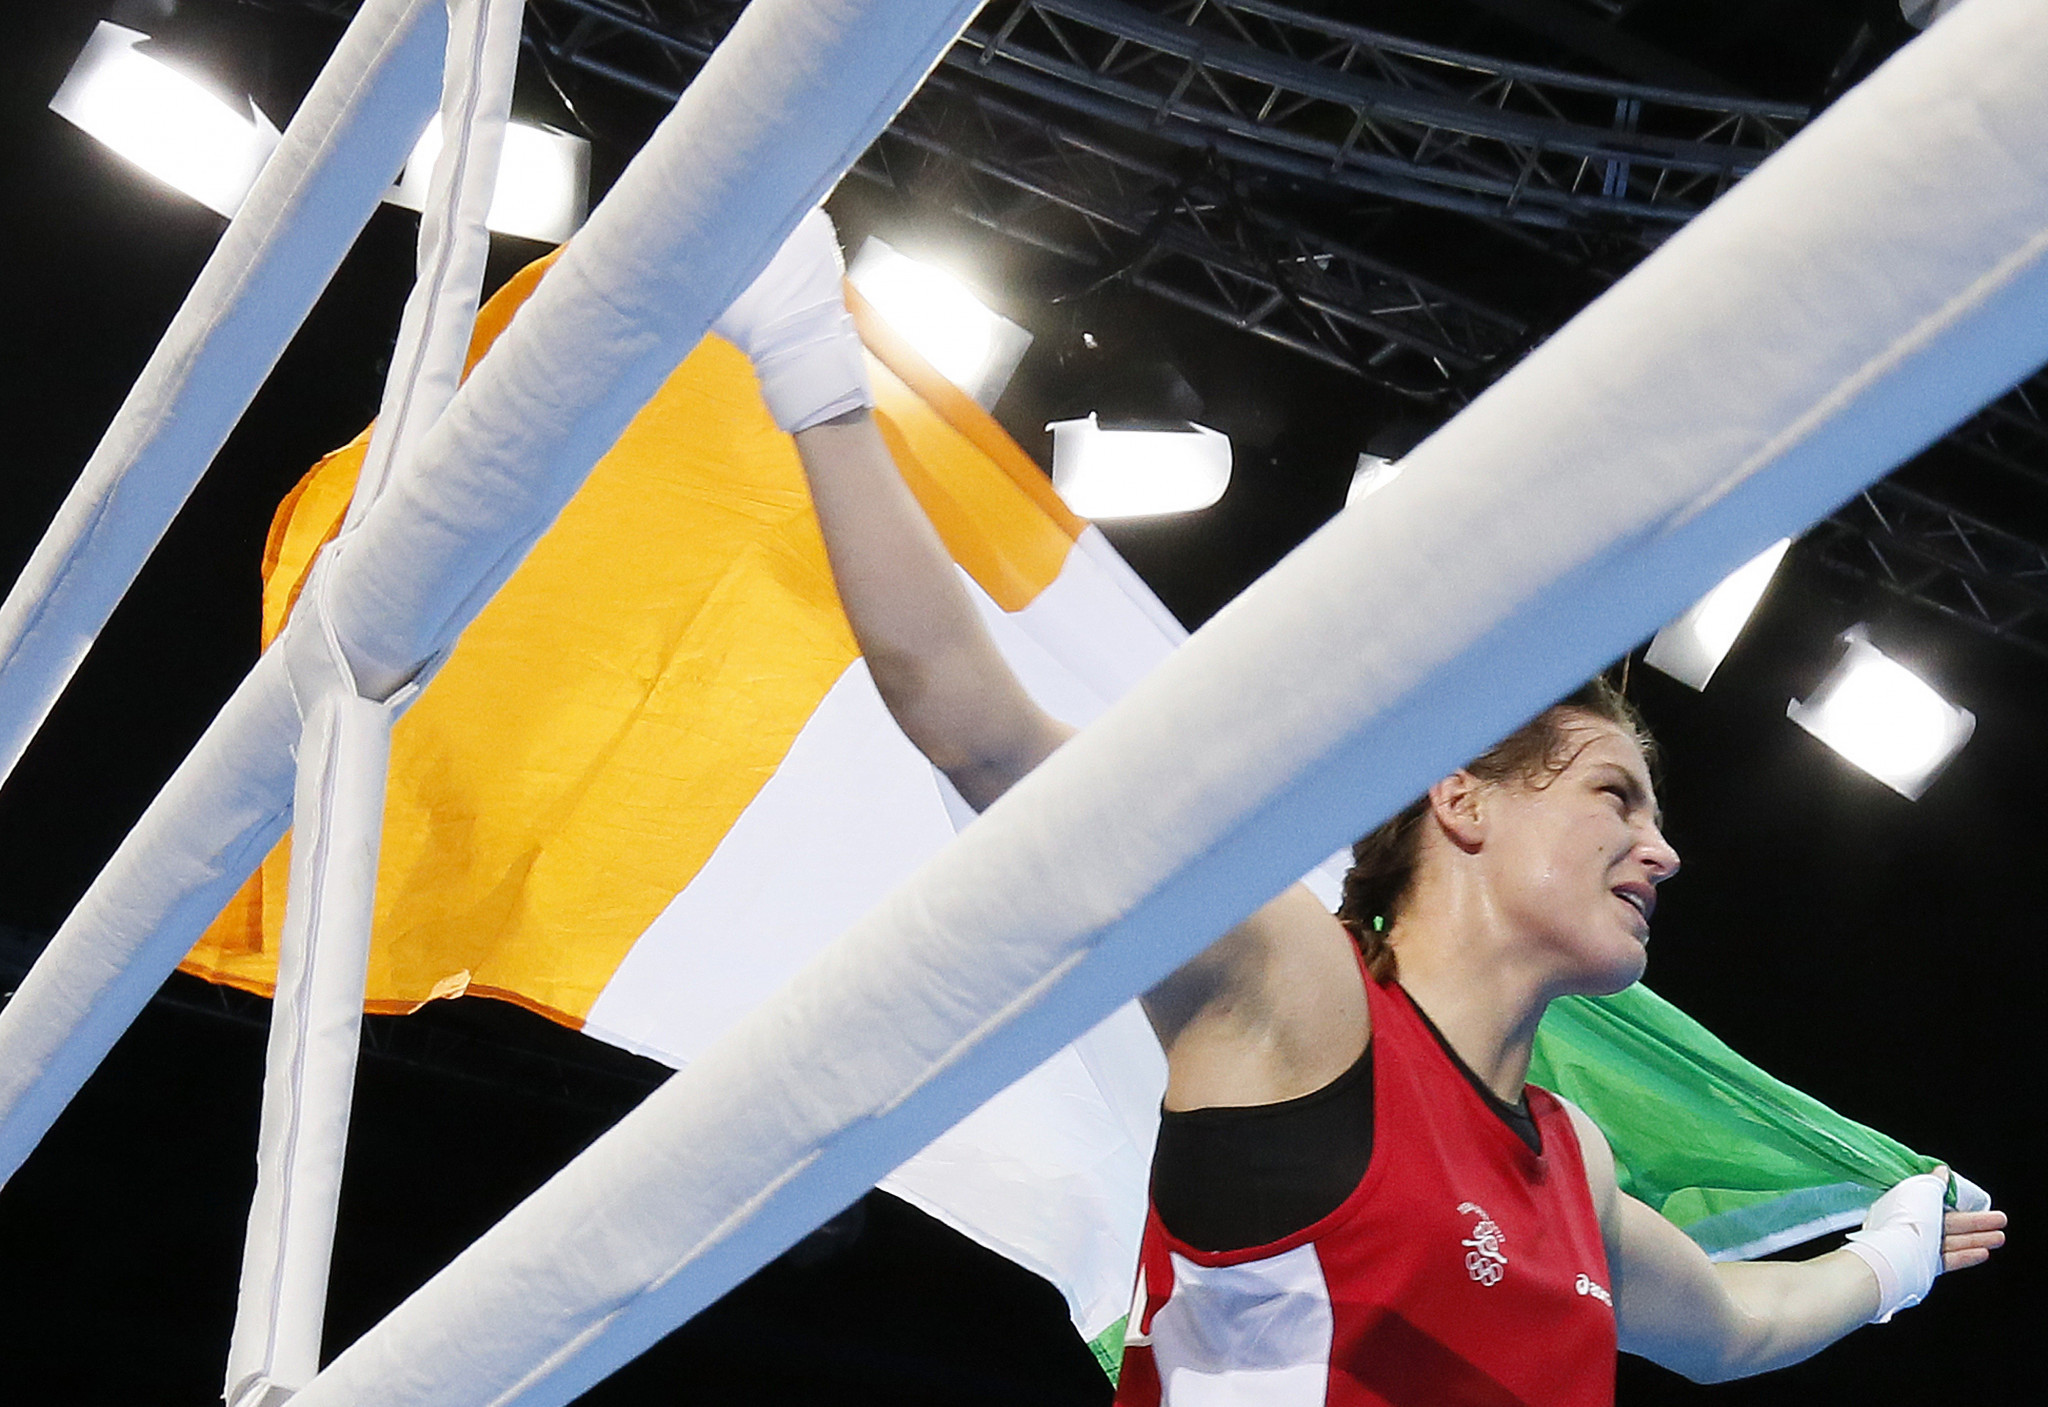 Boxing is Ireland's most successful Olympic sport with 18 medals, including gold at London 2012 for Katie Taylor ©Getty Images